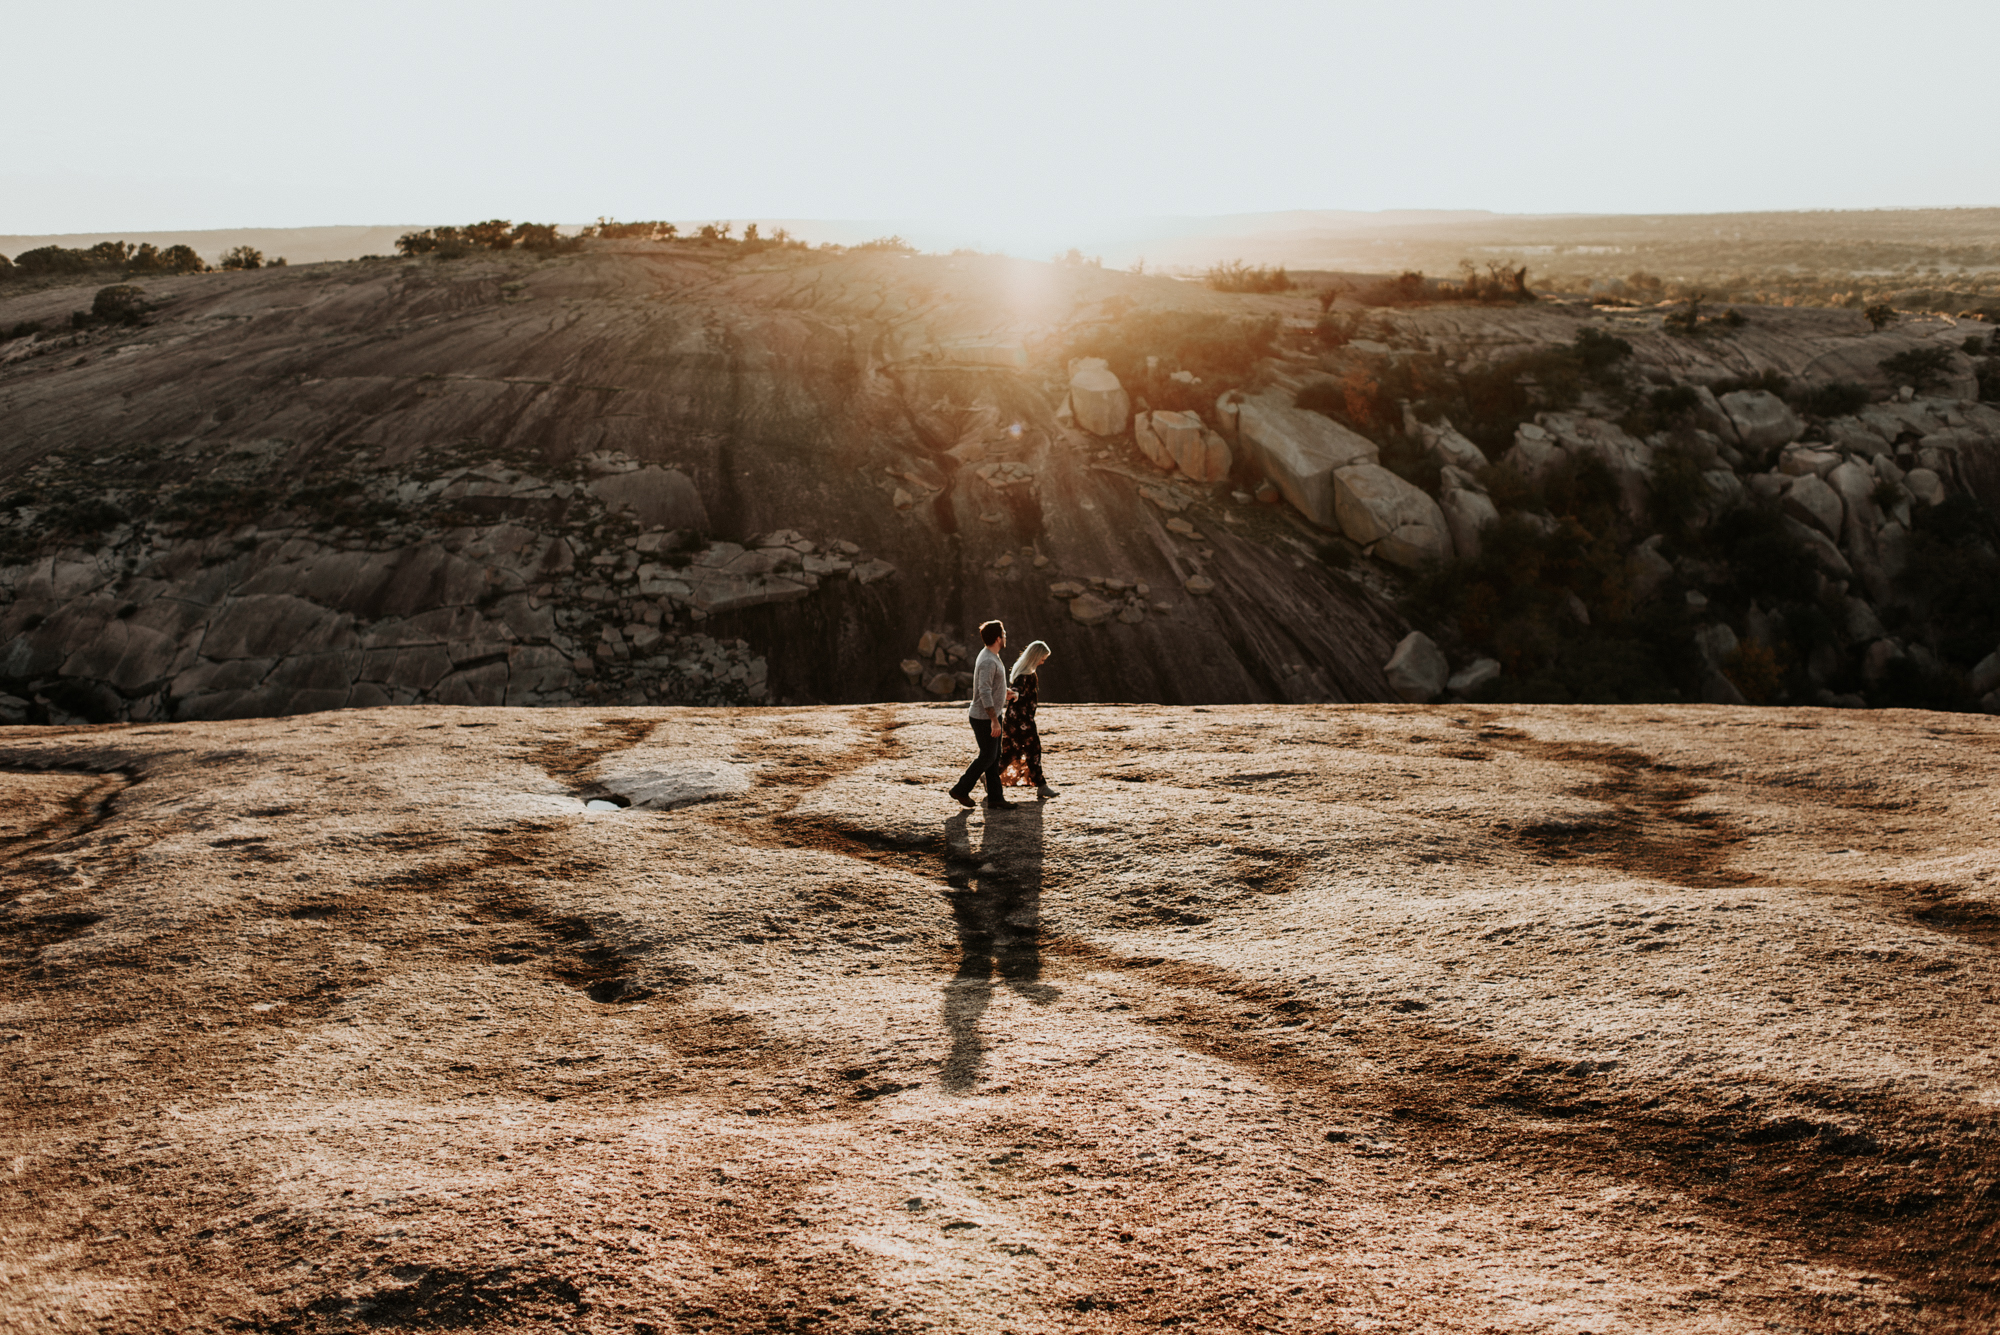 Couples Engagement Photographer, Adventure Photography Session in Enchanted Rock State Natural Area, Texas